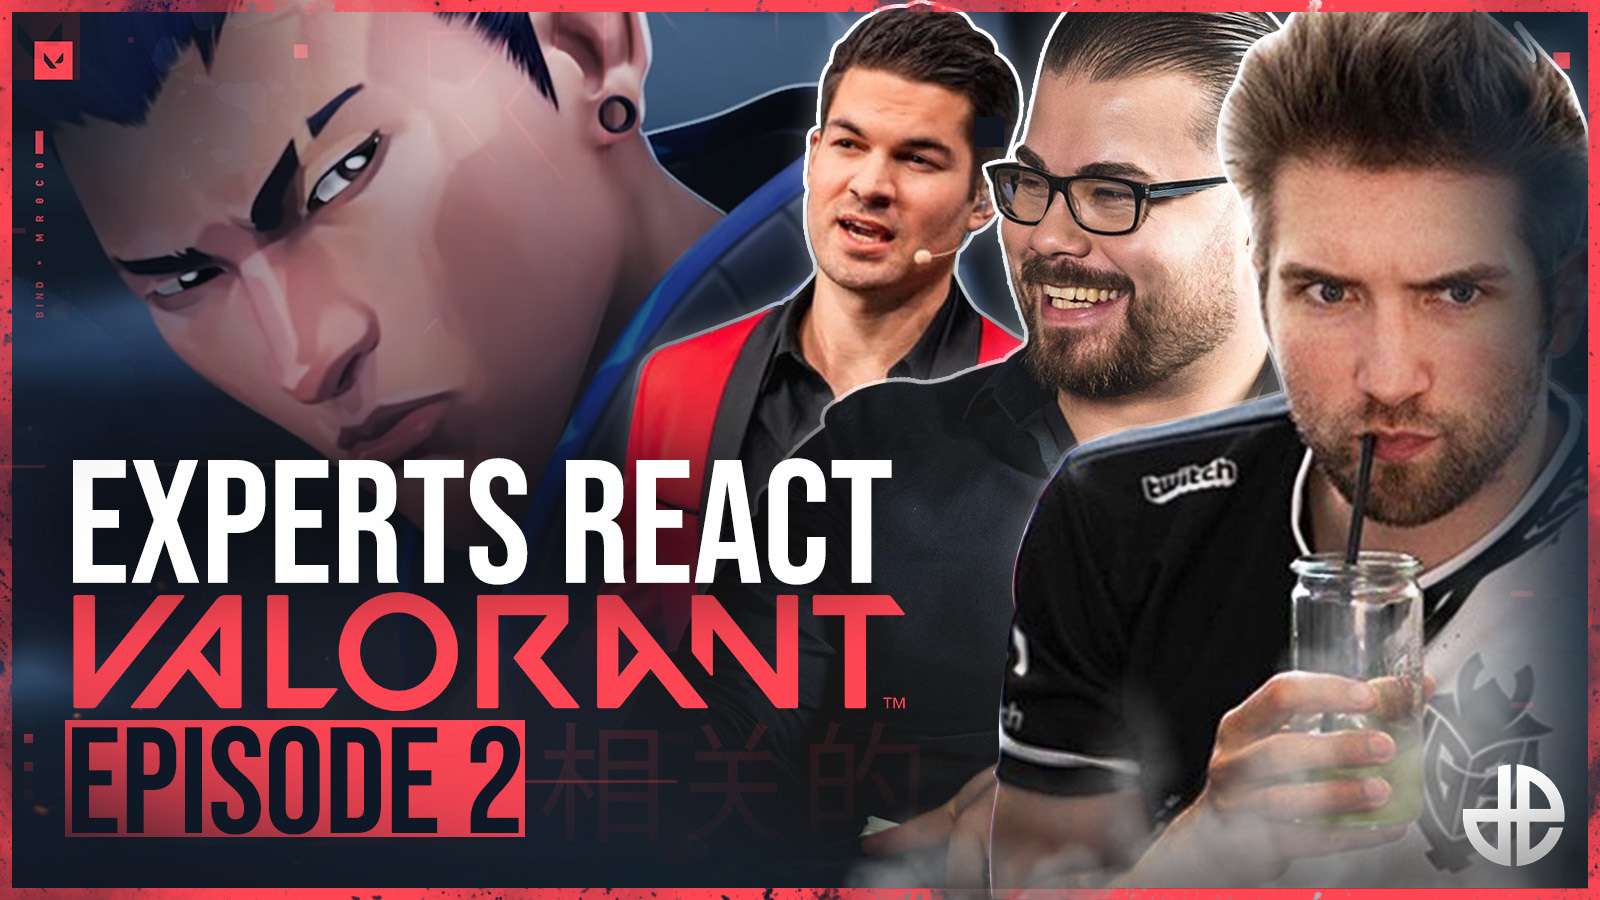 Valorant Experts React to Episode 2 Feature